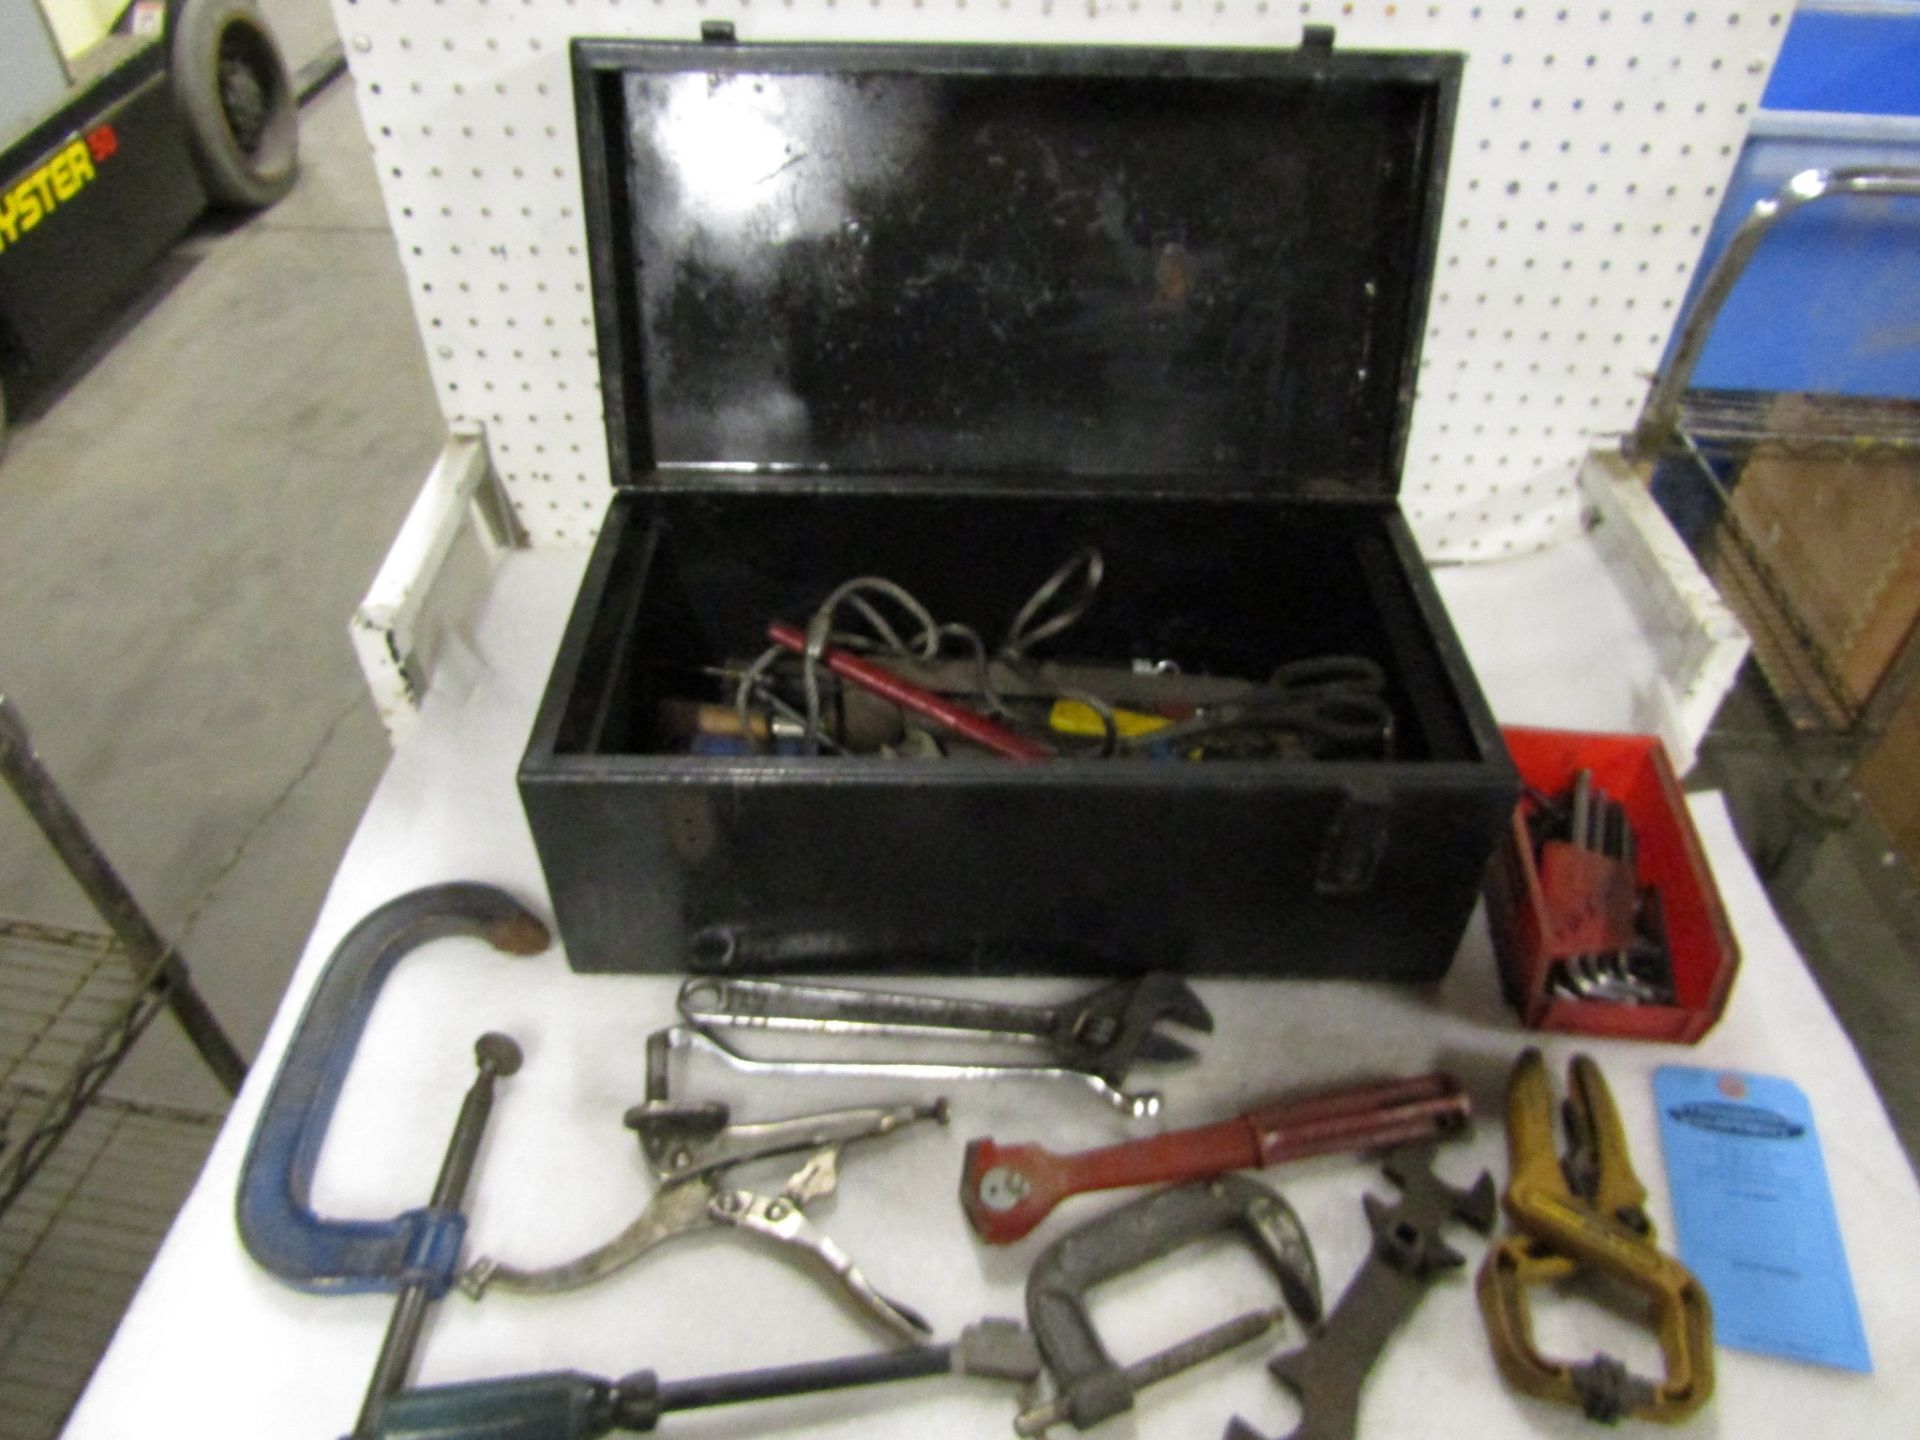 Tool Box with assortred clamps and wrenches